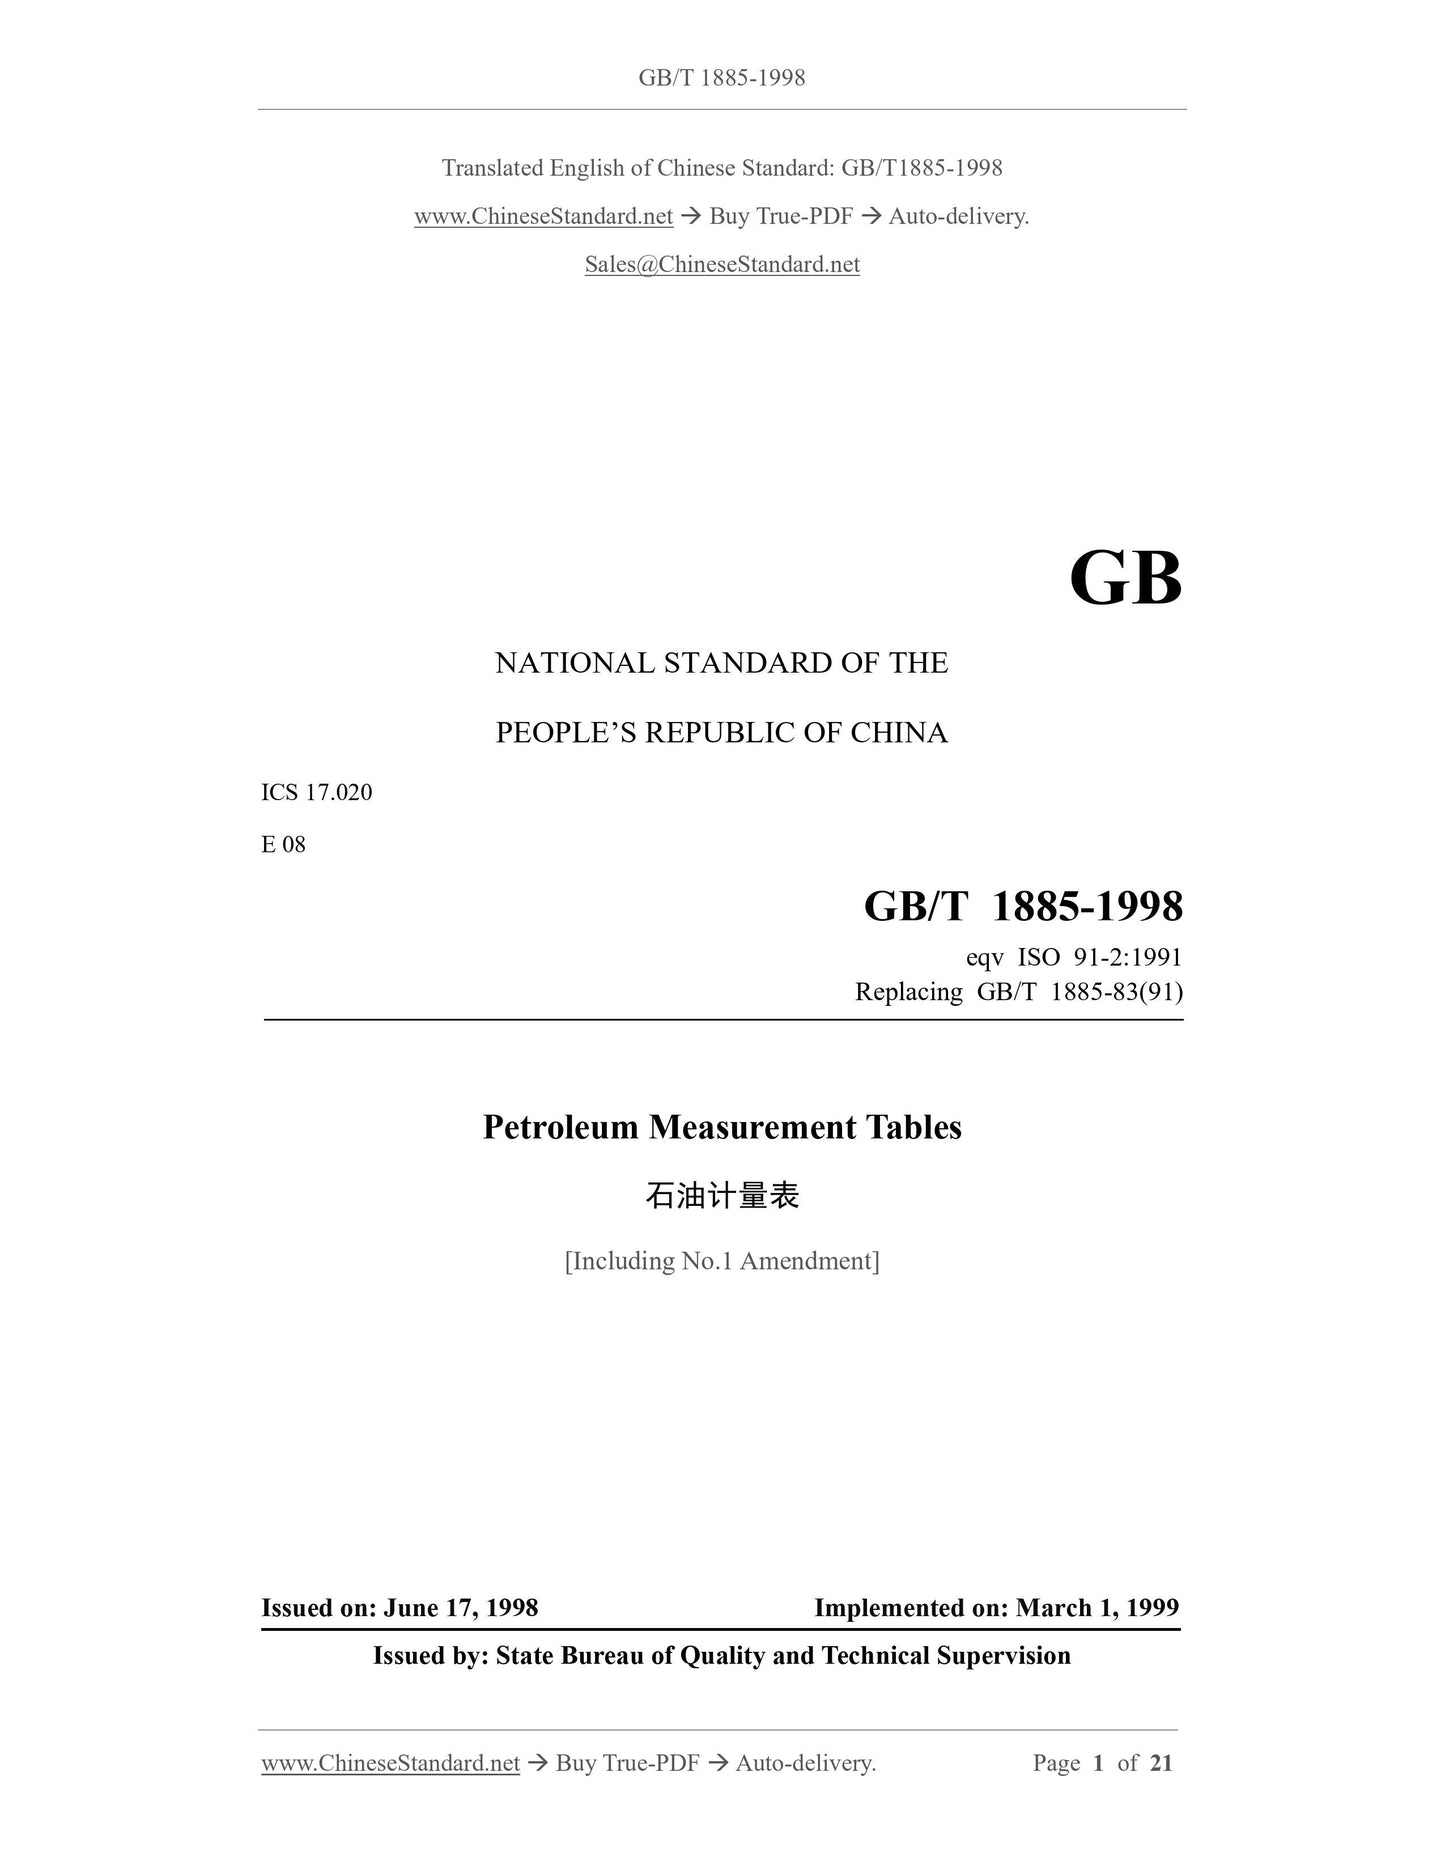 GB/T 1885-1998 Page 1